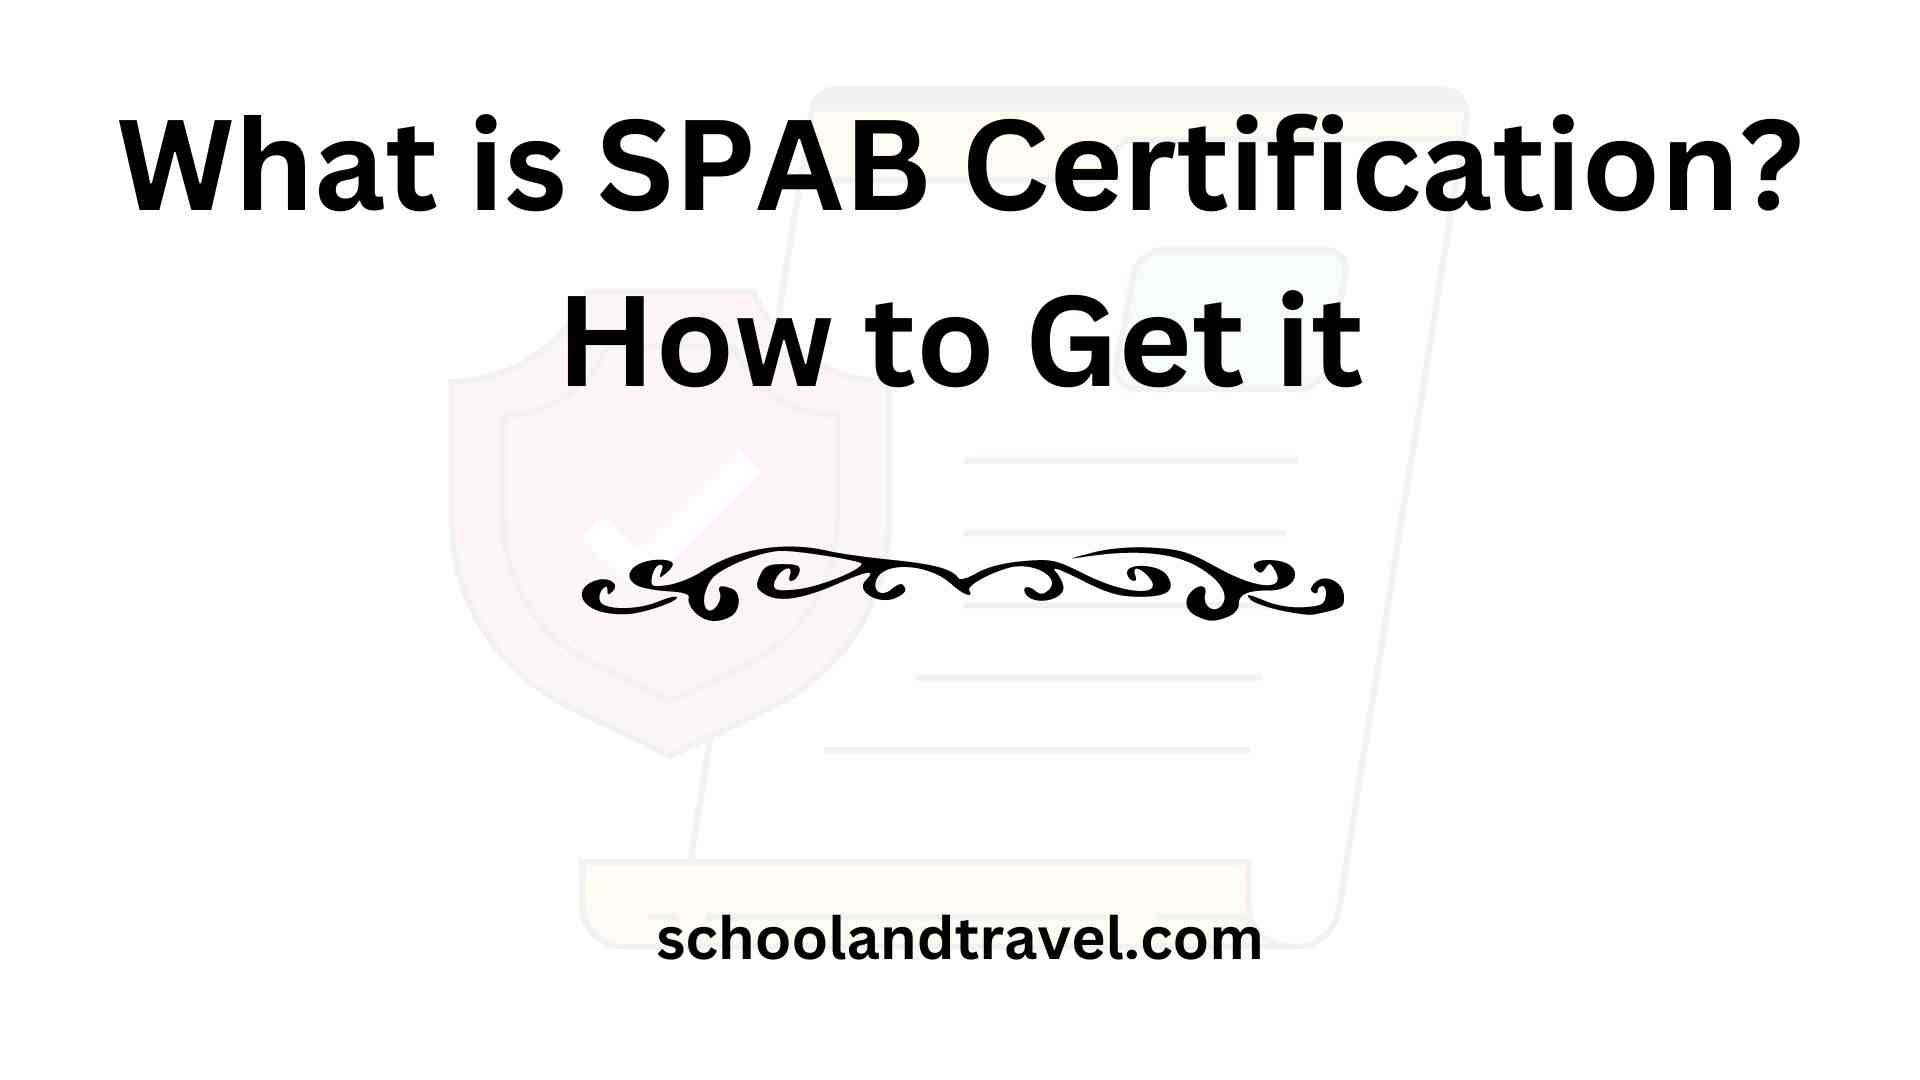 What is SPAB Certification?